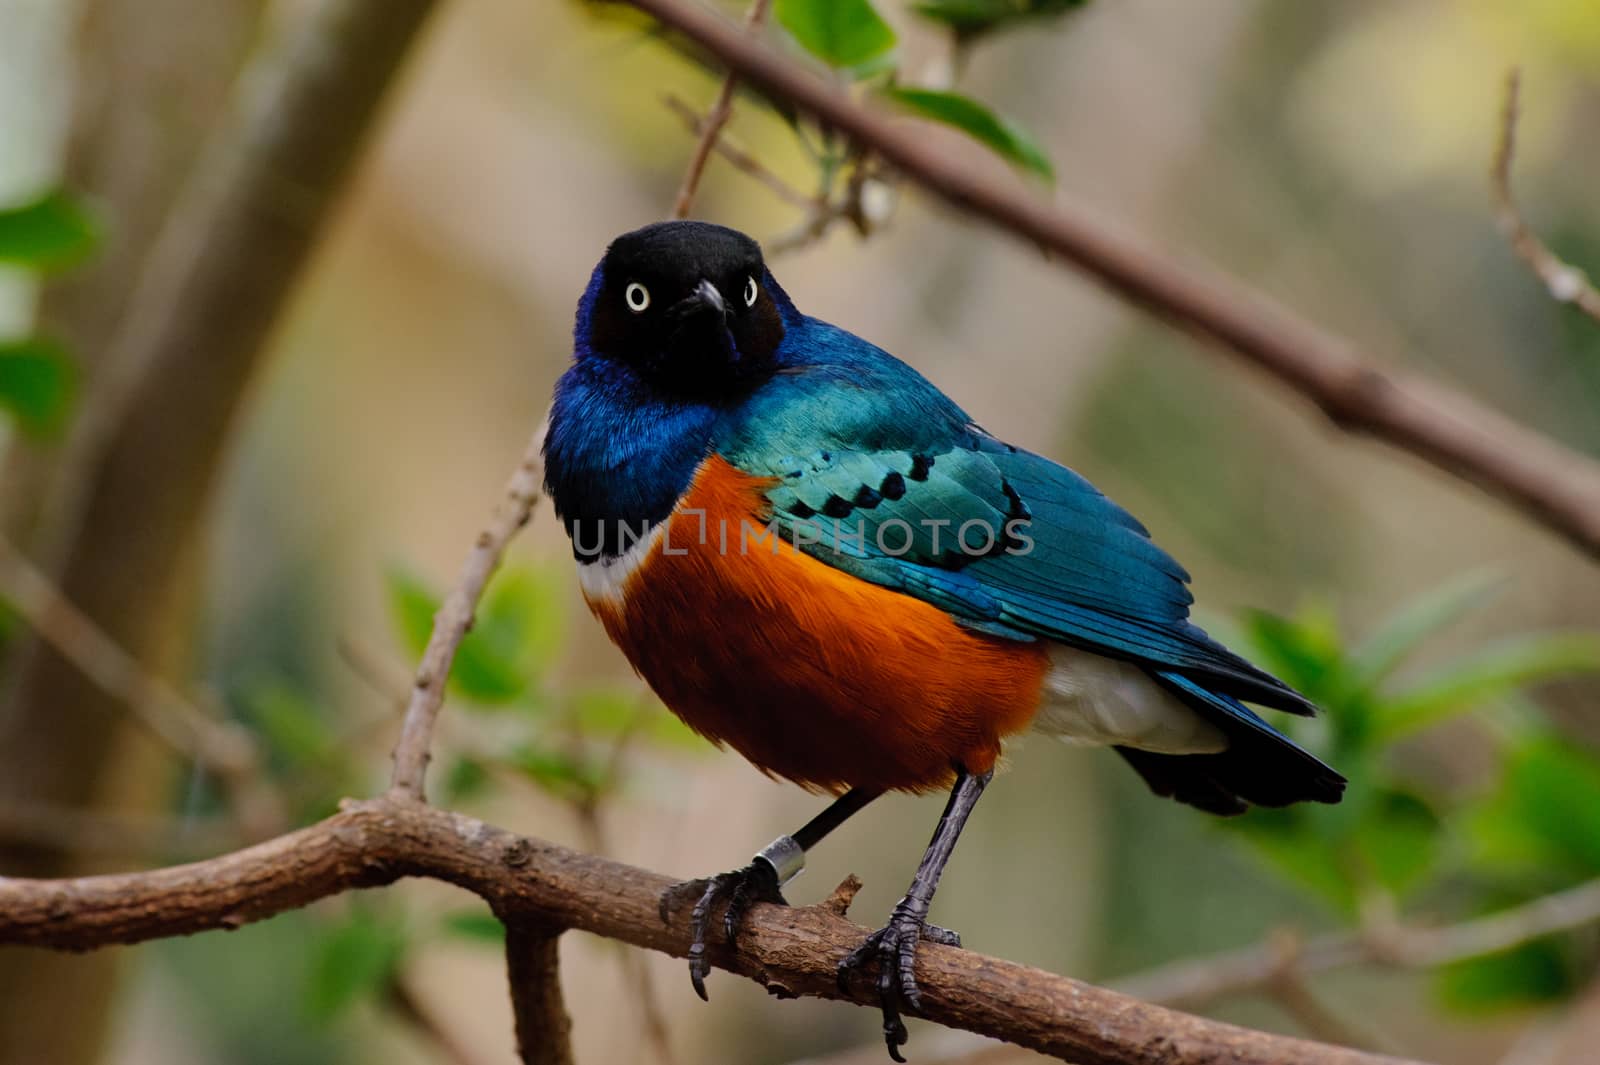 Superb starling looks vibrant in a tree